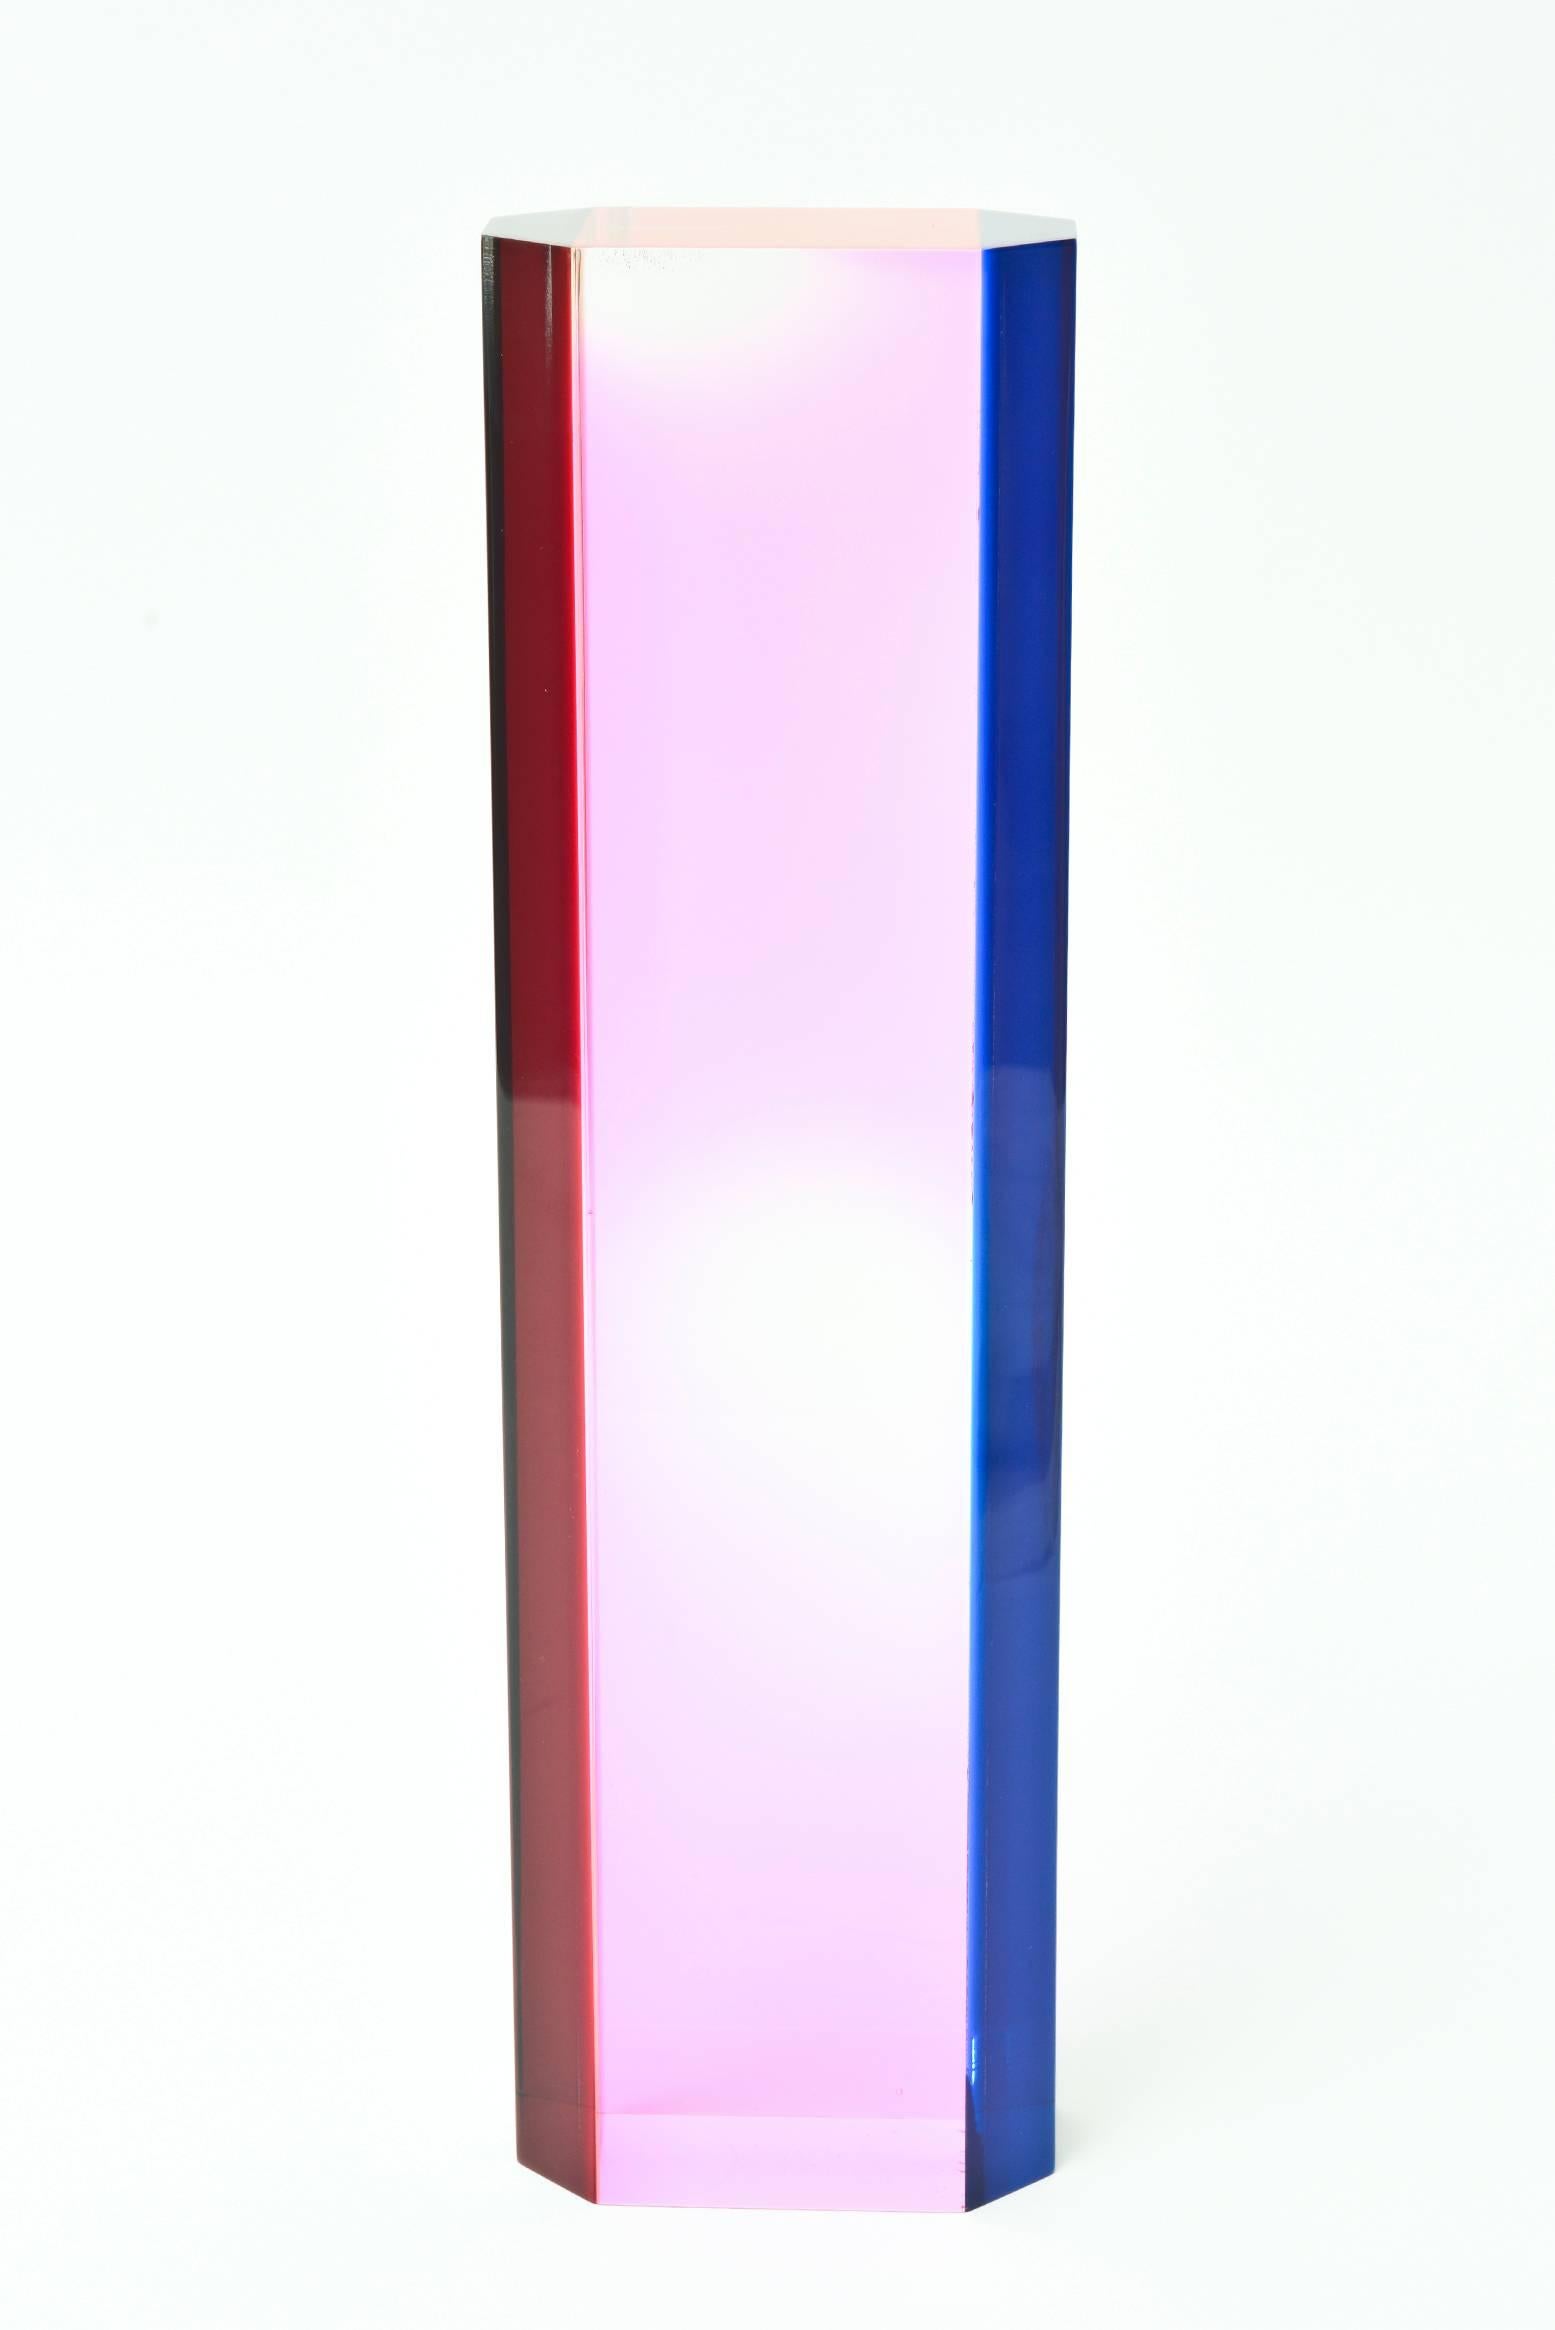 This early Vasa signed and dated Laminated Lucite tower sculpture changes colors with each direction. It is numbered #8254 Vasa 76. At that time, he was very succinct about recording all information, The layers of color are brilliant.